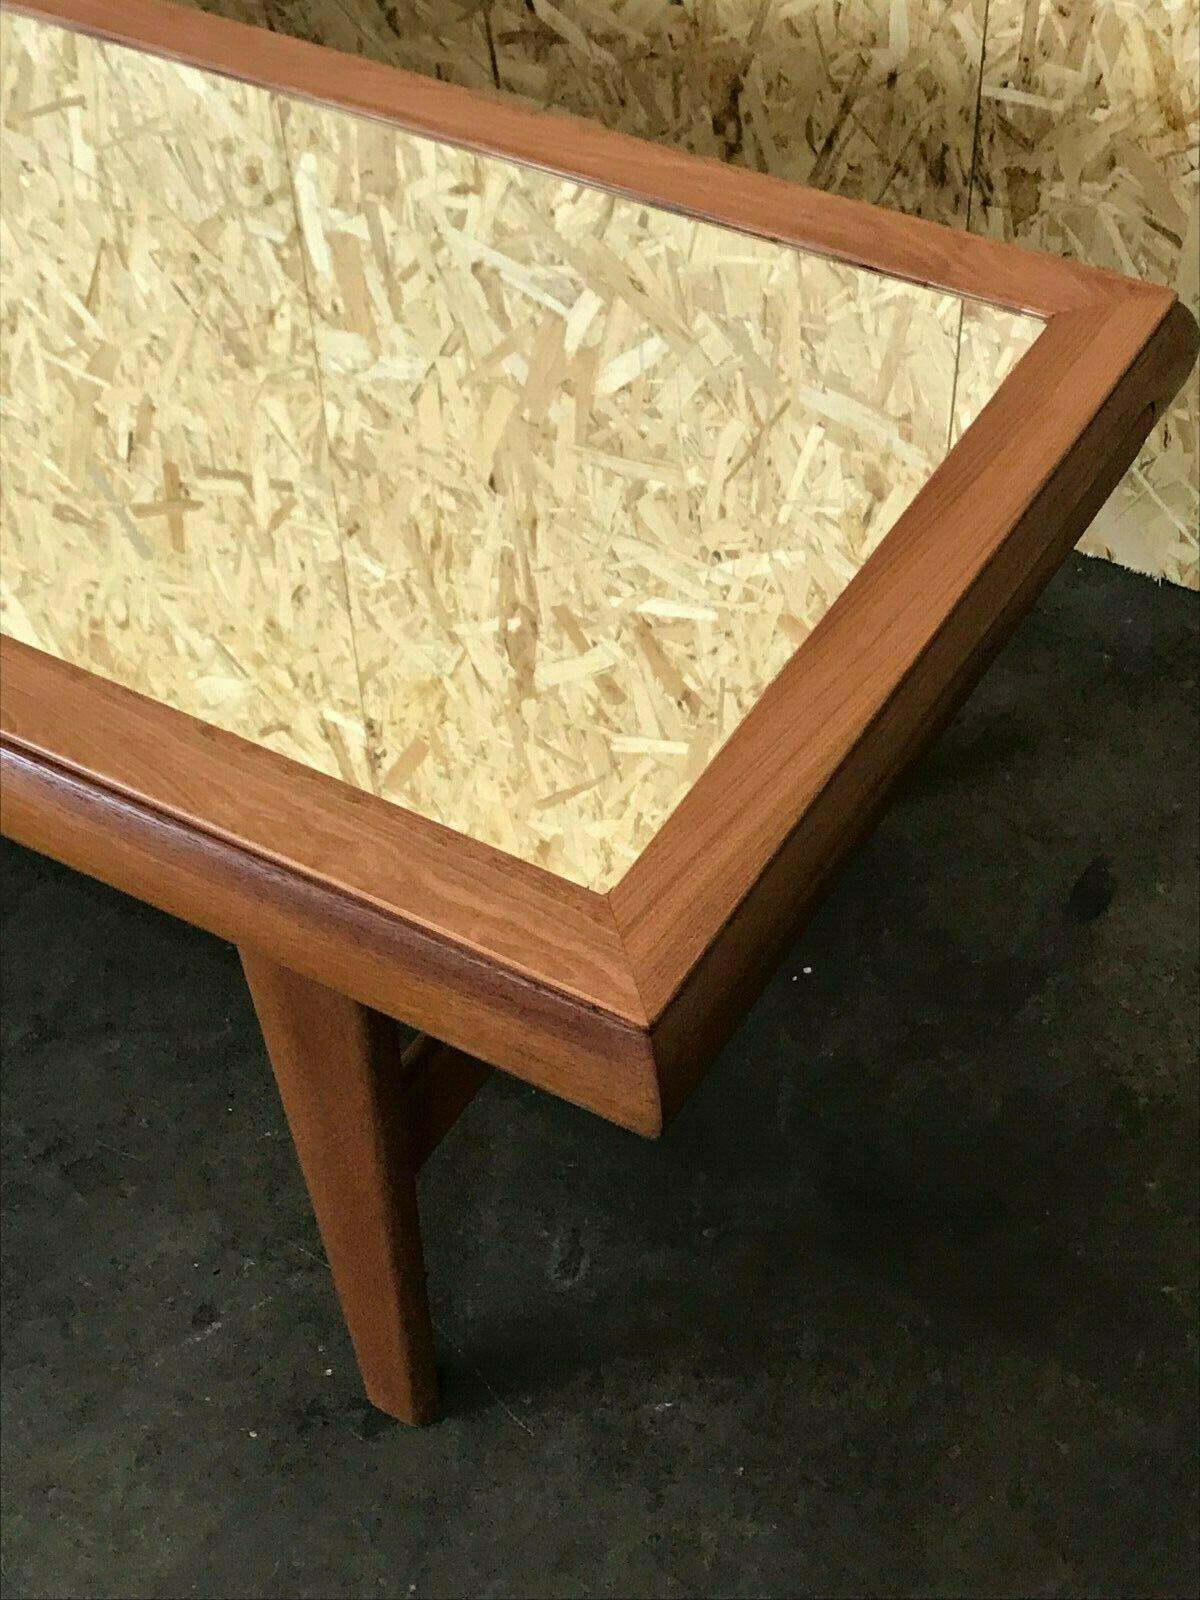 60s 70s Teak Table Coffee Table Danish Design with Mirror For Sale 3